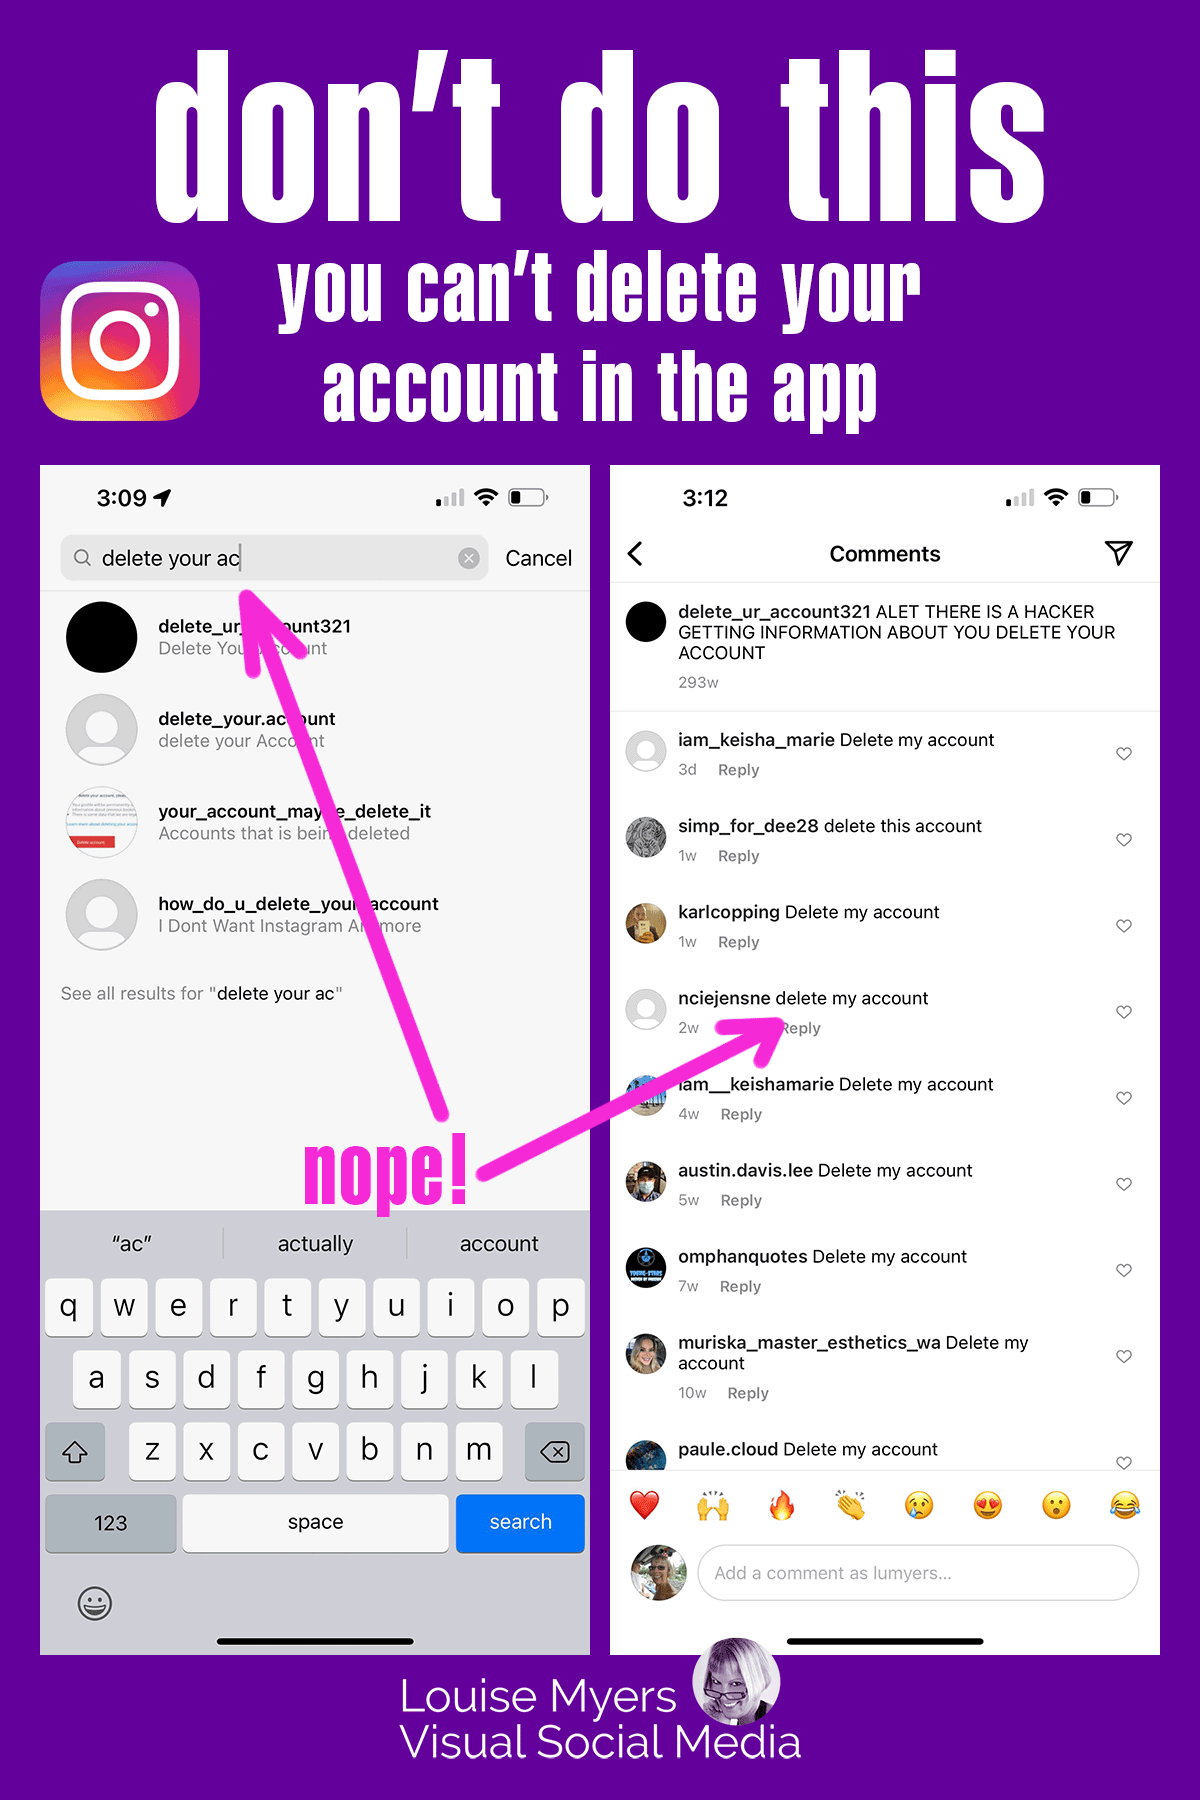 screenshots show that you can't delete your IG account in the app.